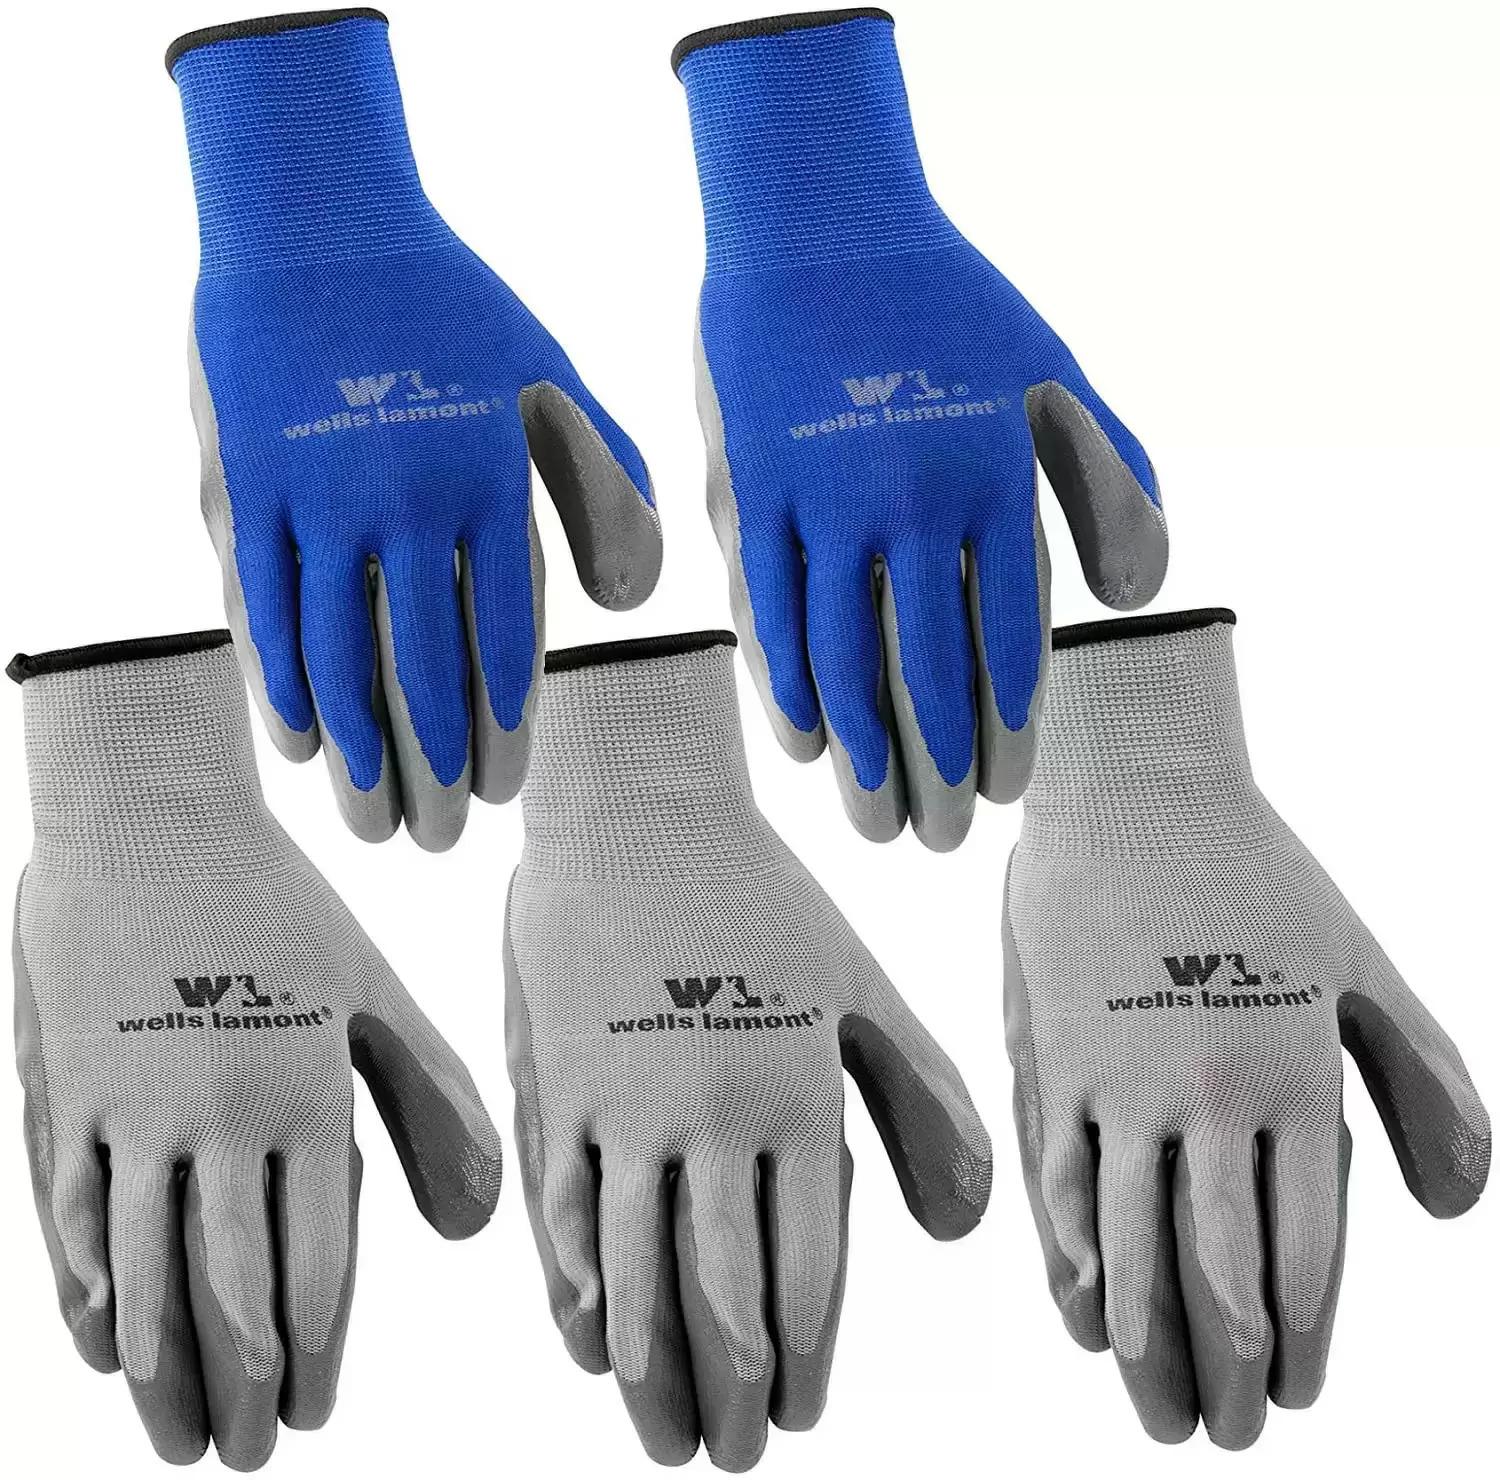 5 Wells Lamont Nitrile Work Gloves for $4.96 Shipped